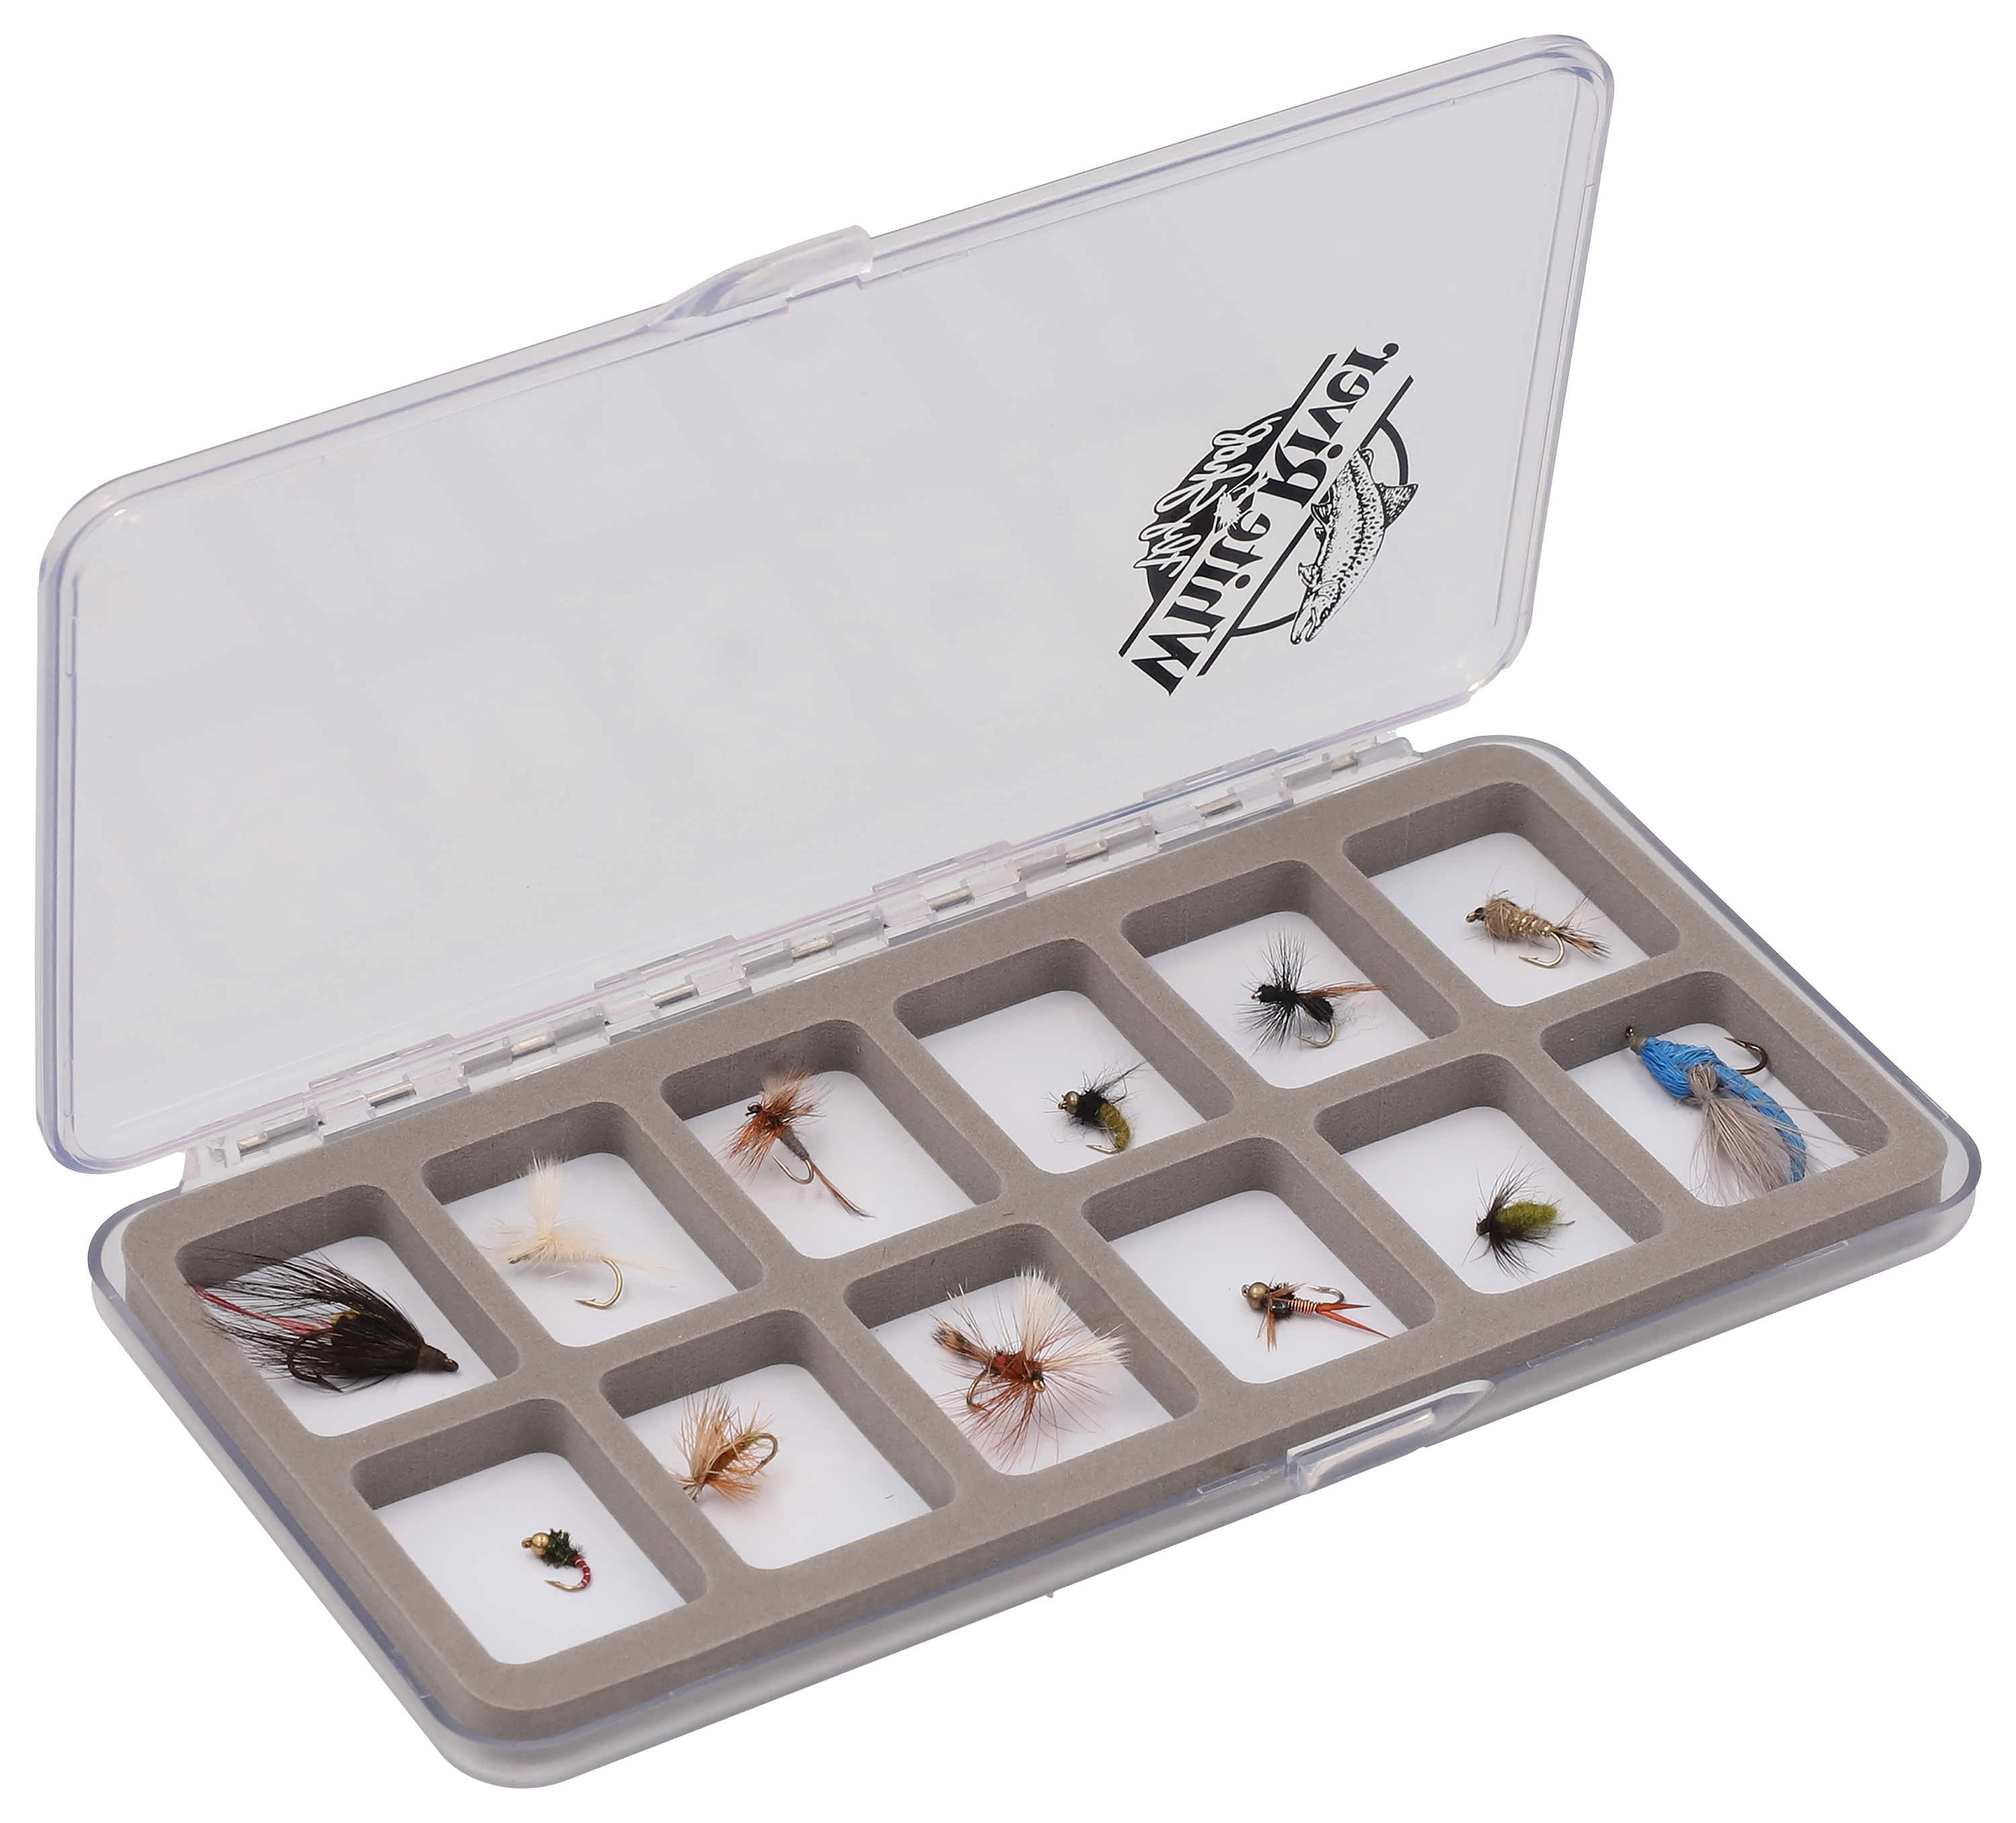 White River Fly Shop Riseform Magnetic Bottom Fly Box - 7-1/2 x 4 x 1/2 - 12 Foam Compartment-Magnetic